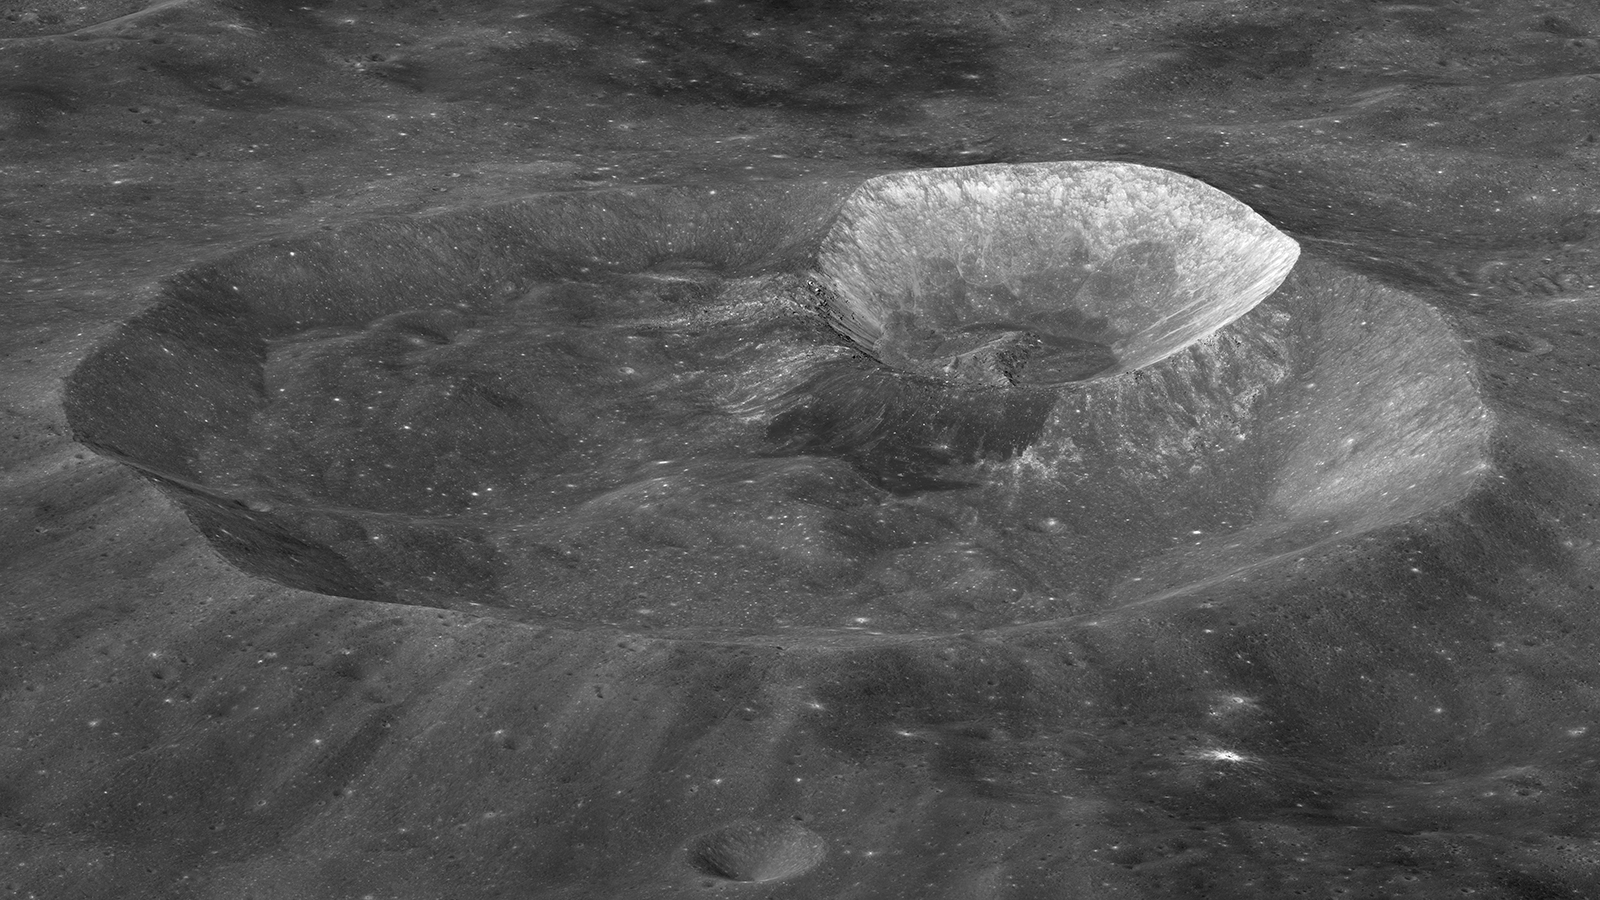 Double impact crater on the Moon.